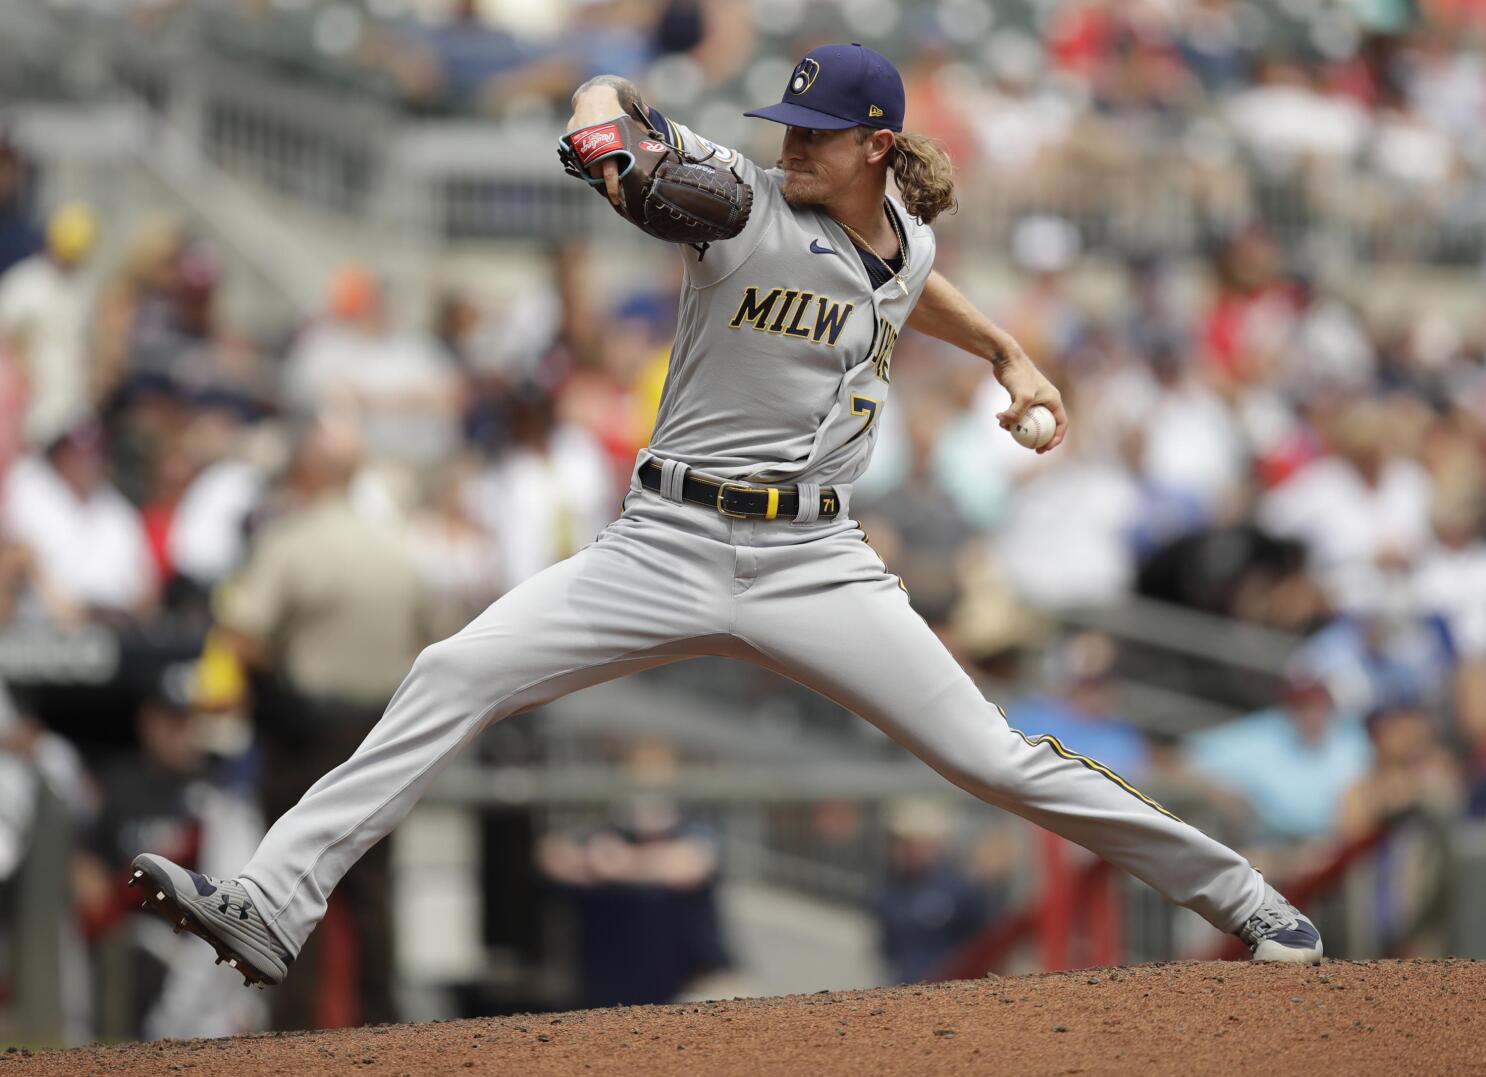 Relief pitching: Closer Josh Hader always ready to take ball for Brewers